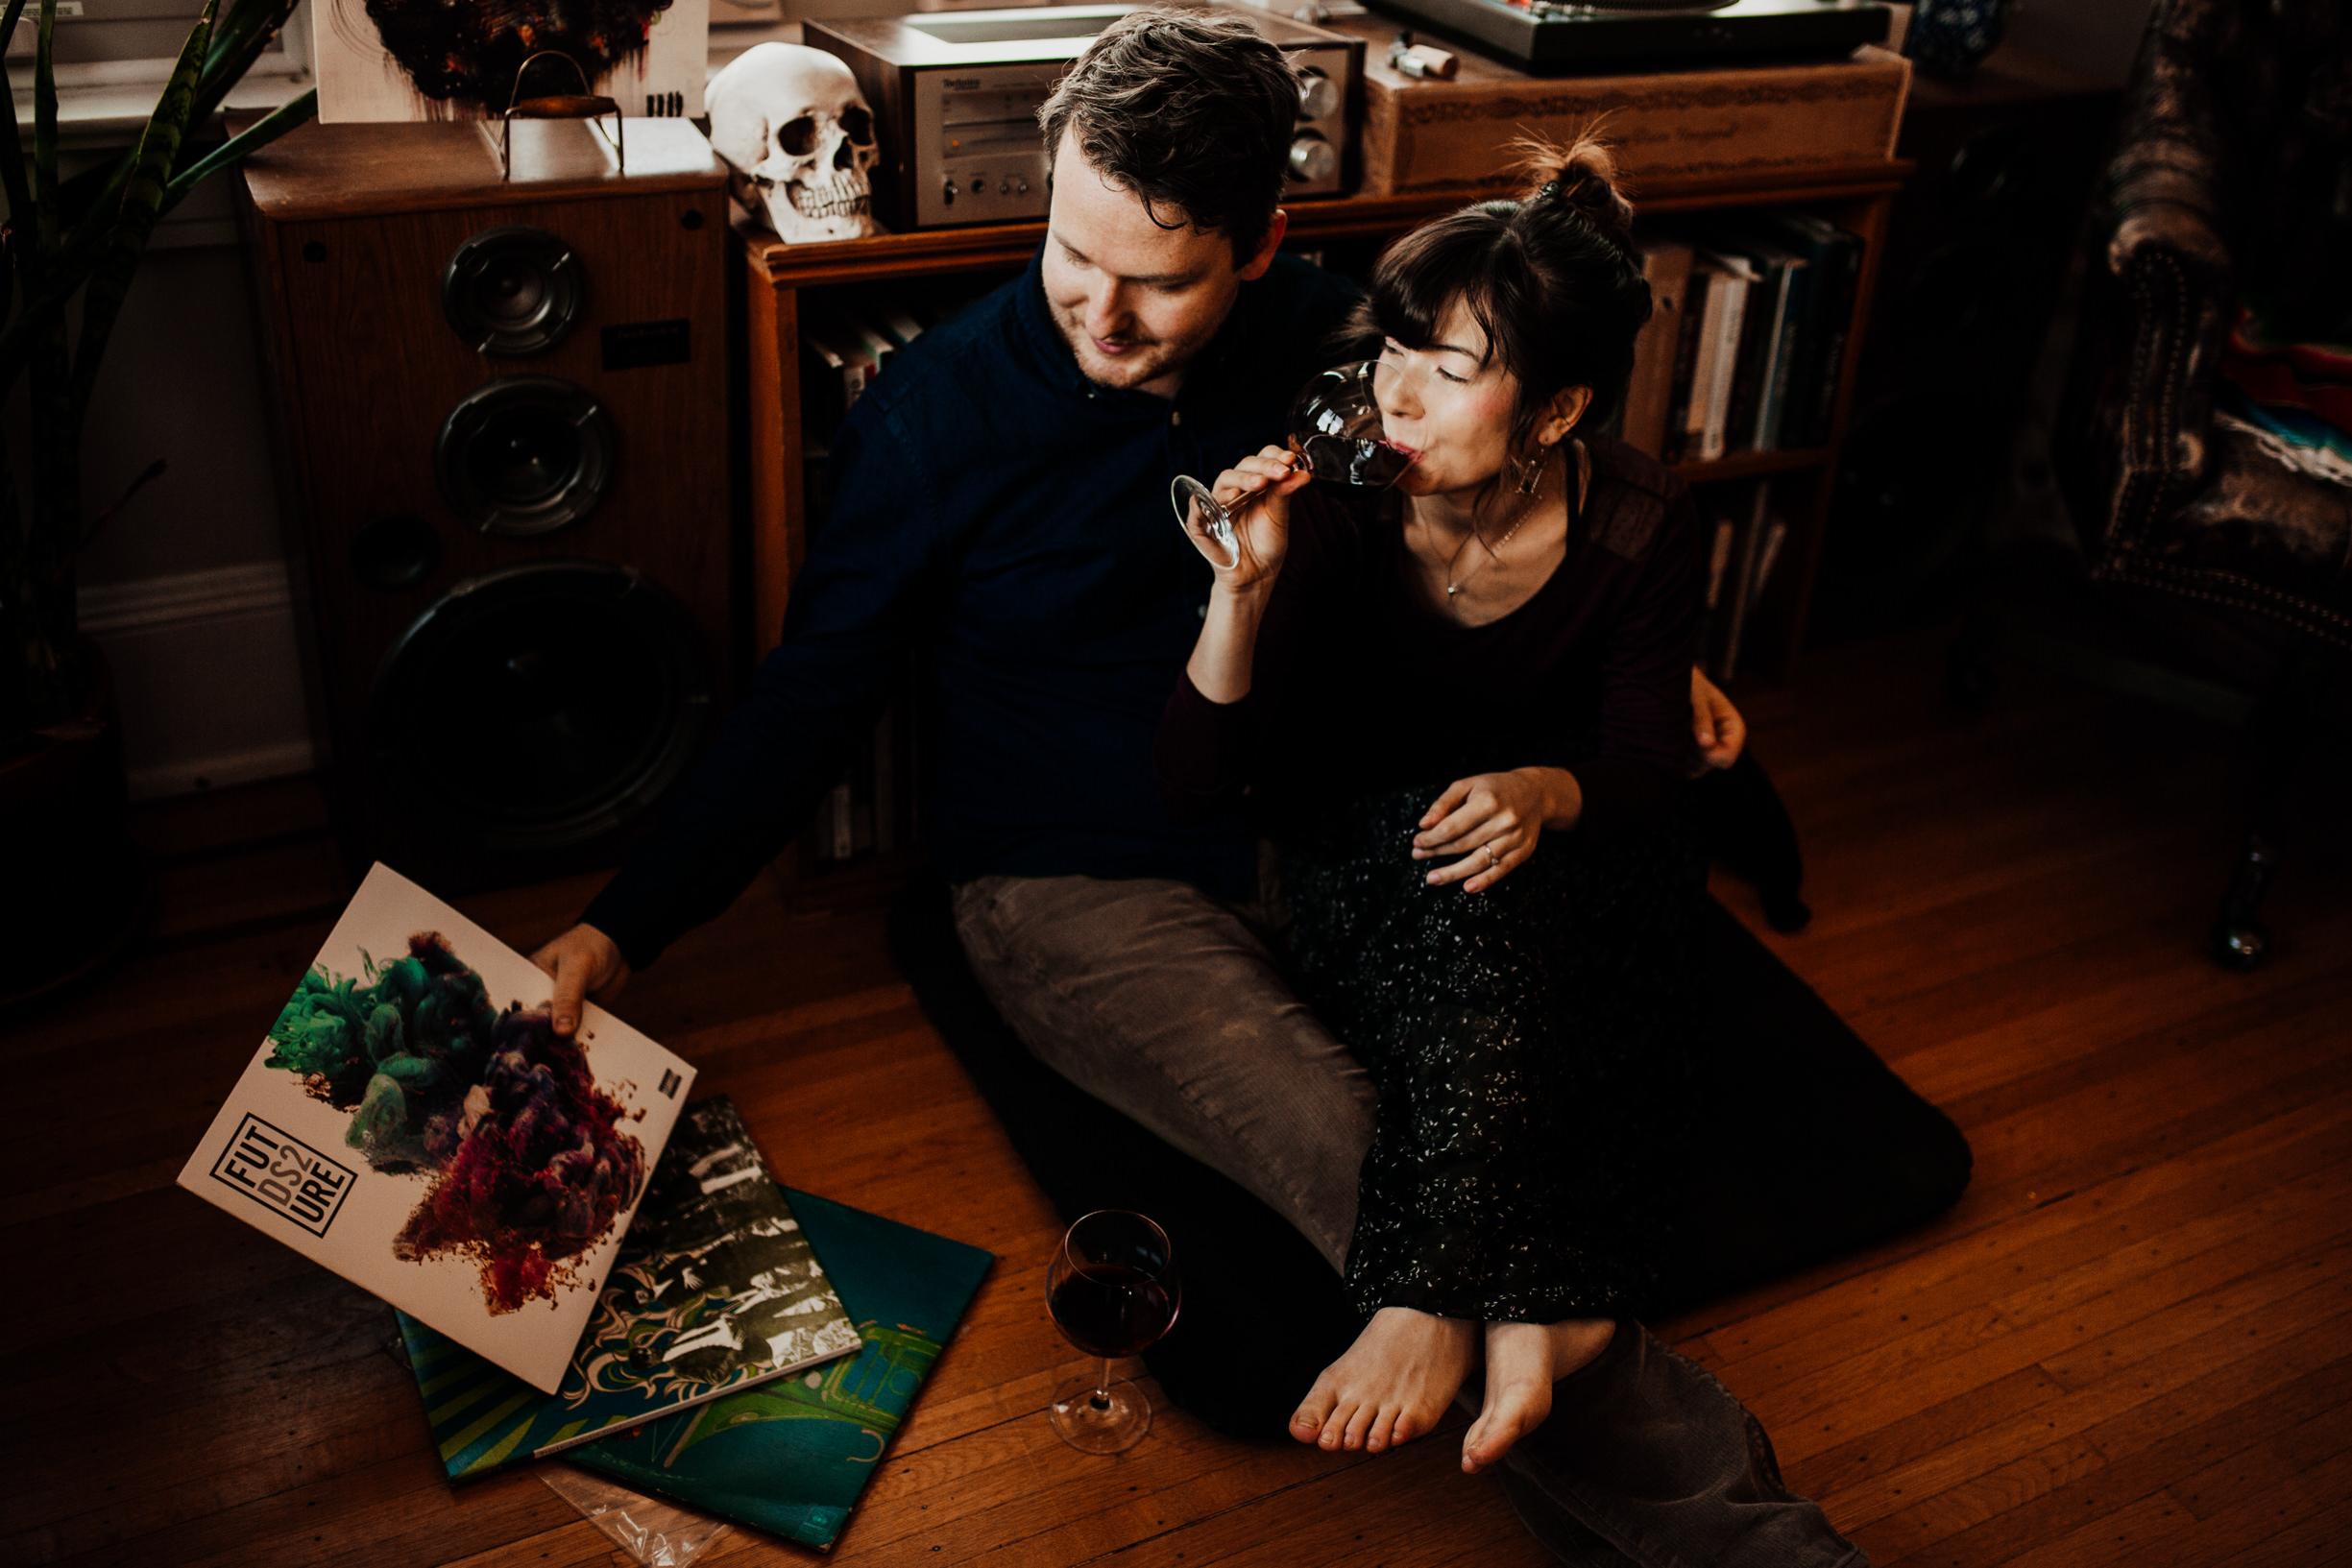 louisville-engagement-photographer-record-store-in-home-session-crystal-ludwick-photo (27 of 53).jpg